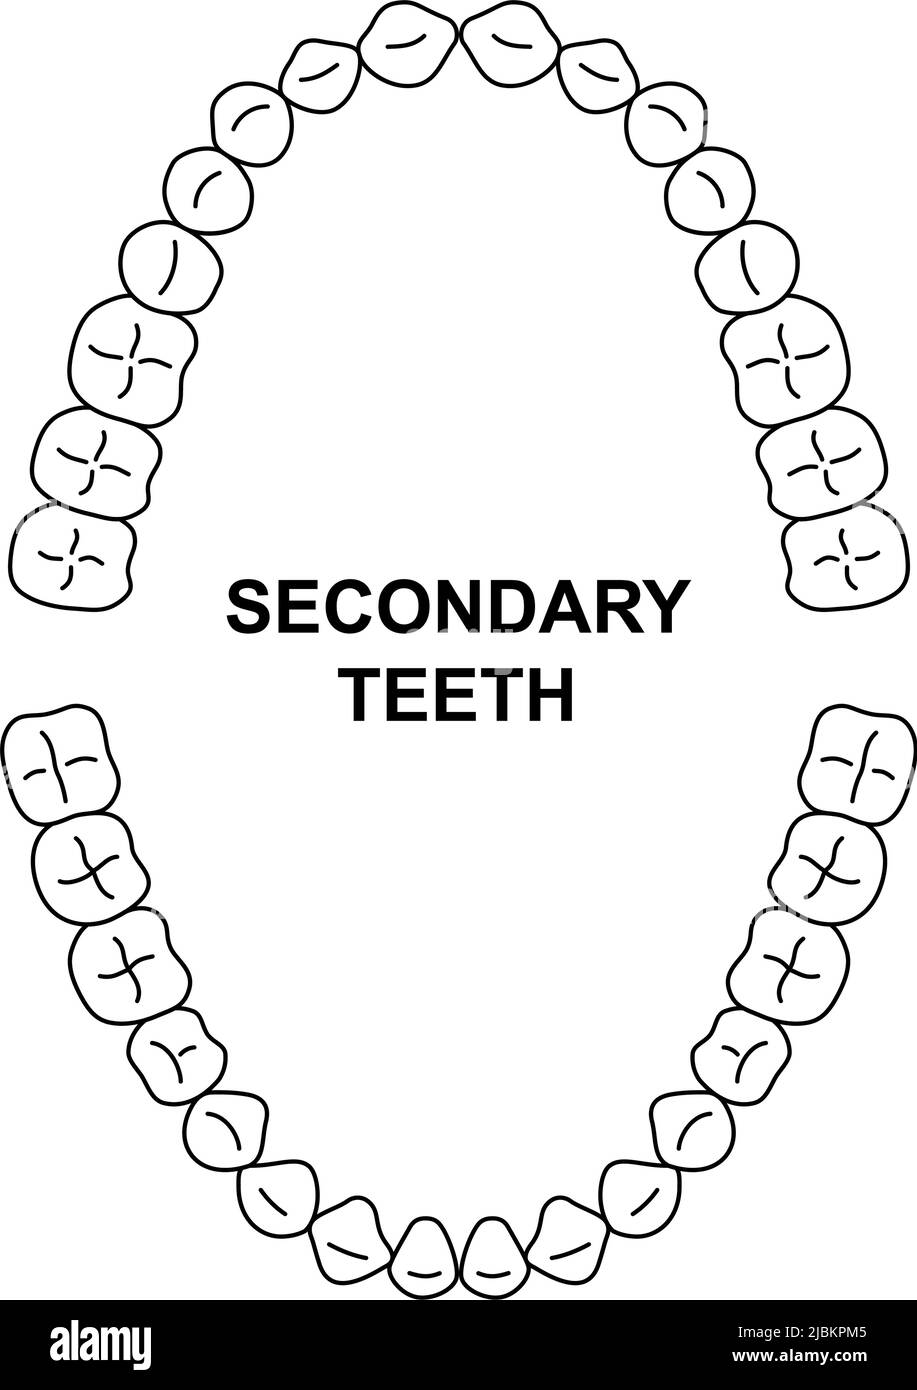 Secondary teeth dentition anatomy. Adult human upper and lower jaw. Adult tooth arrival chart. Permanent teeth silhouette Stock Vector